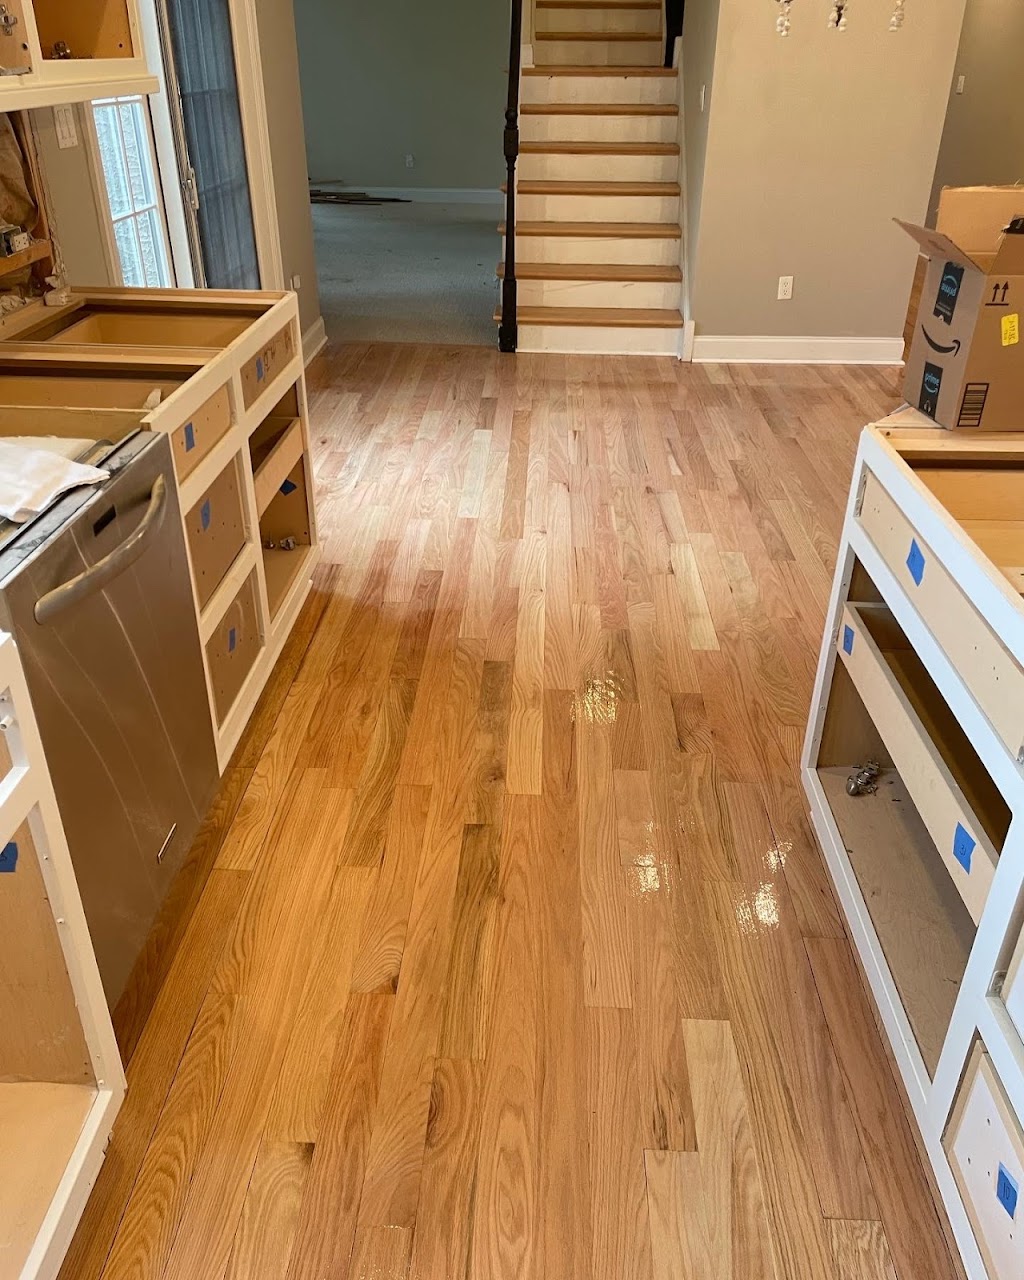 LHI Flooring, Painting, Carpentry, and Remodeling | 11 Hagerty Blvd Unit 5, West Chester, PA 19382 | Phone: (484) 905-2411